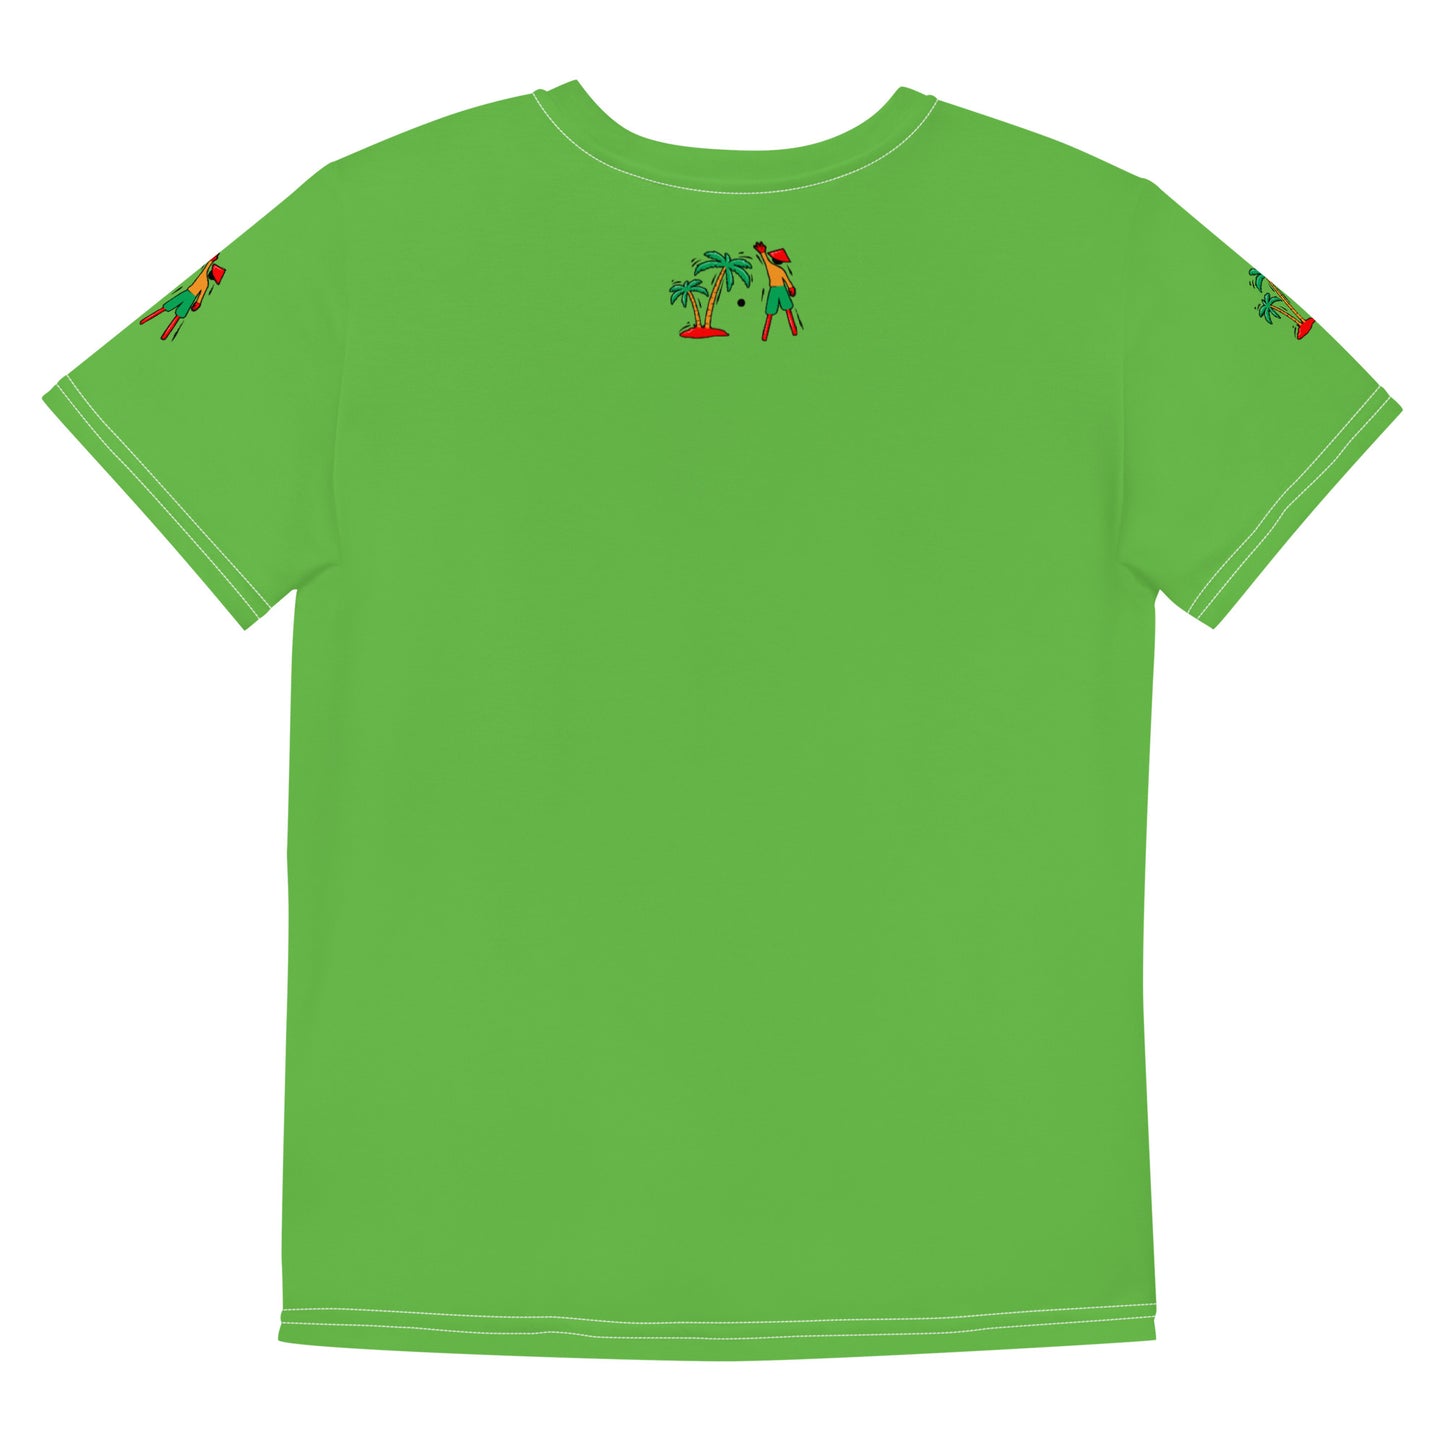 Green V.Localized (Ice/Gold/Green) Youth Dry-Fit T-Shirt